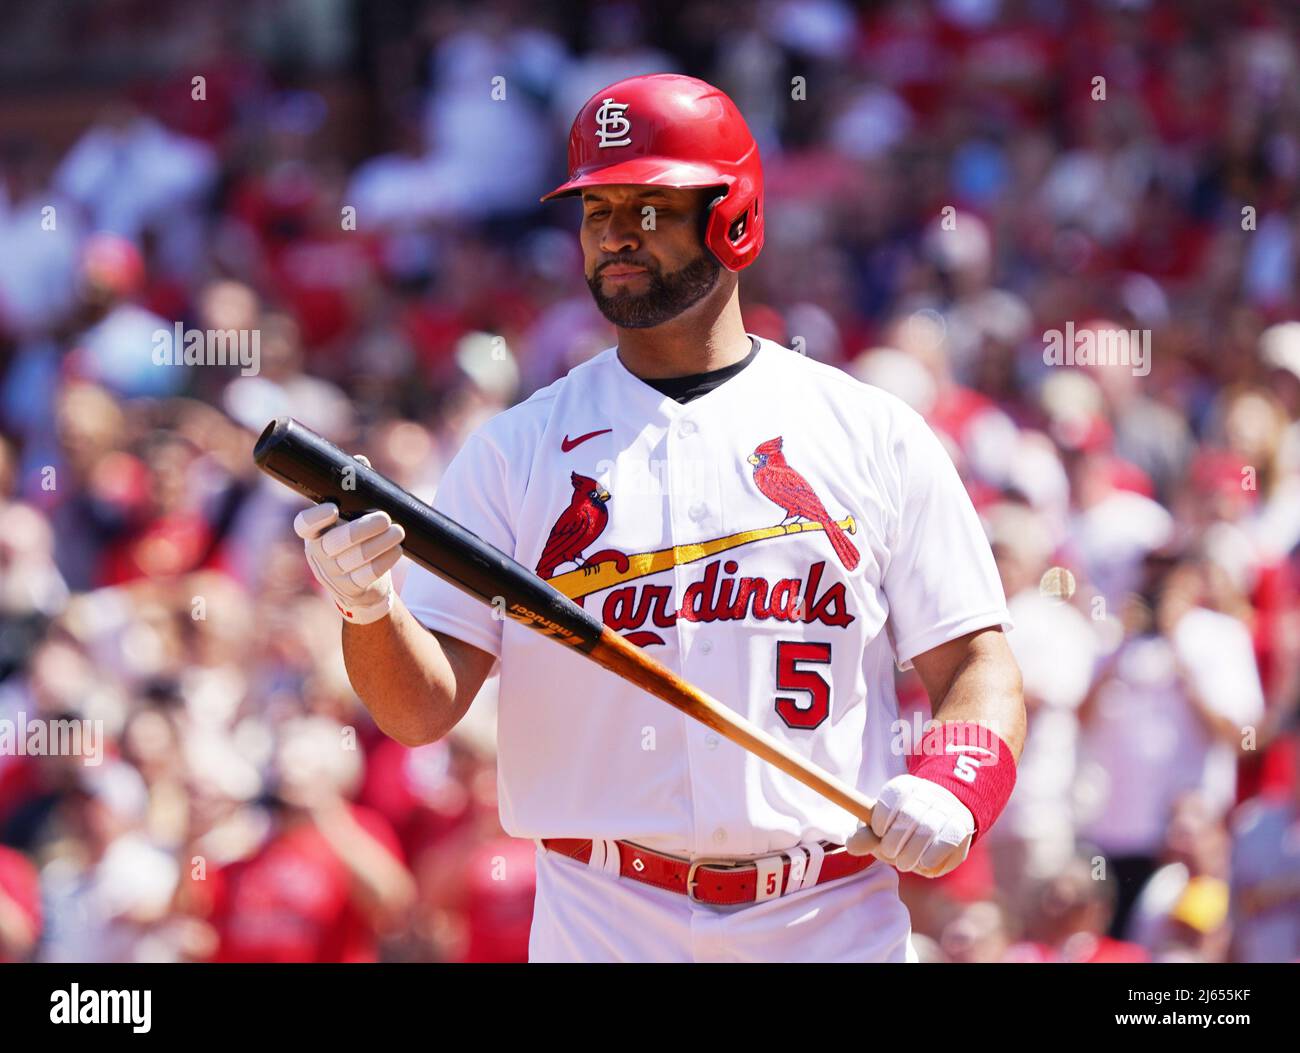 St. Louis, United States. 27th Apr, 2022. St. Louis Cardinals Albert Pujols  inspects his bat as he bats in the sixth inning against the New York Mets  at Busch Stadium in St.